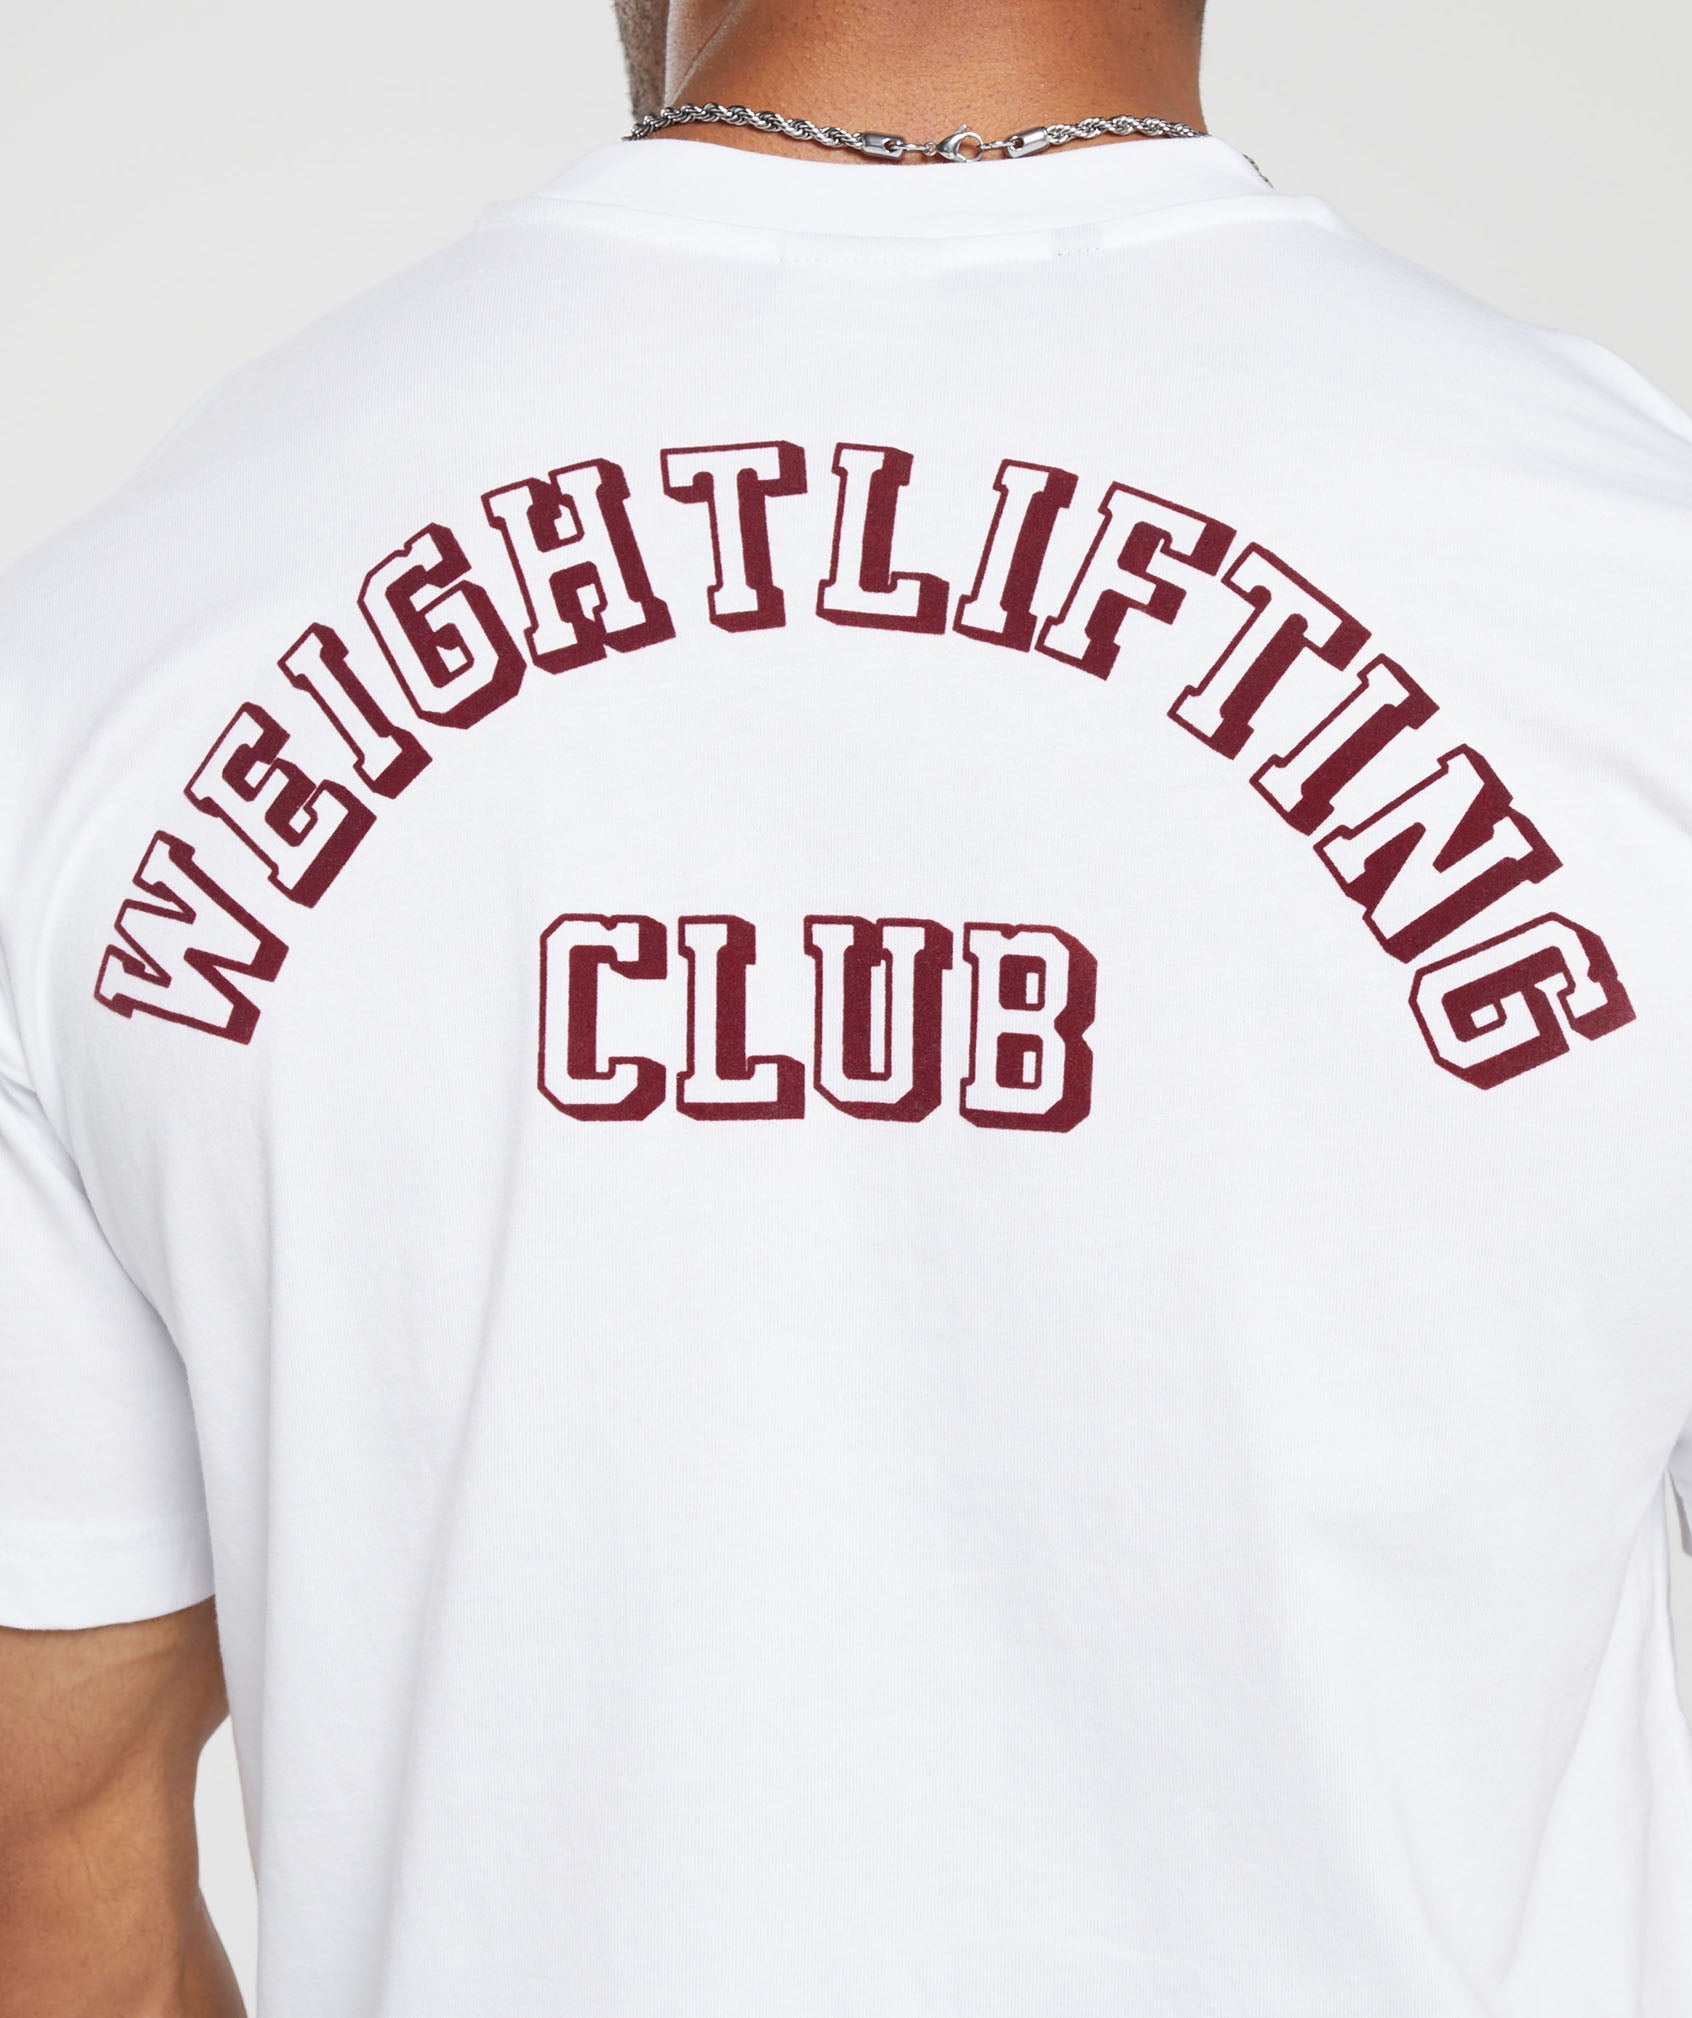 Weightlifting Club T-Shirt in White - view 6